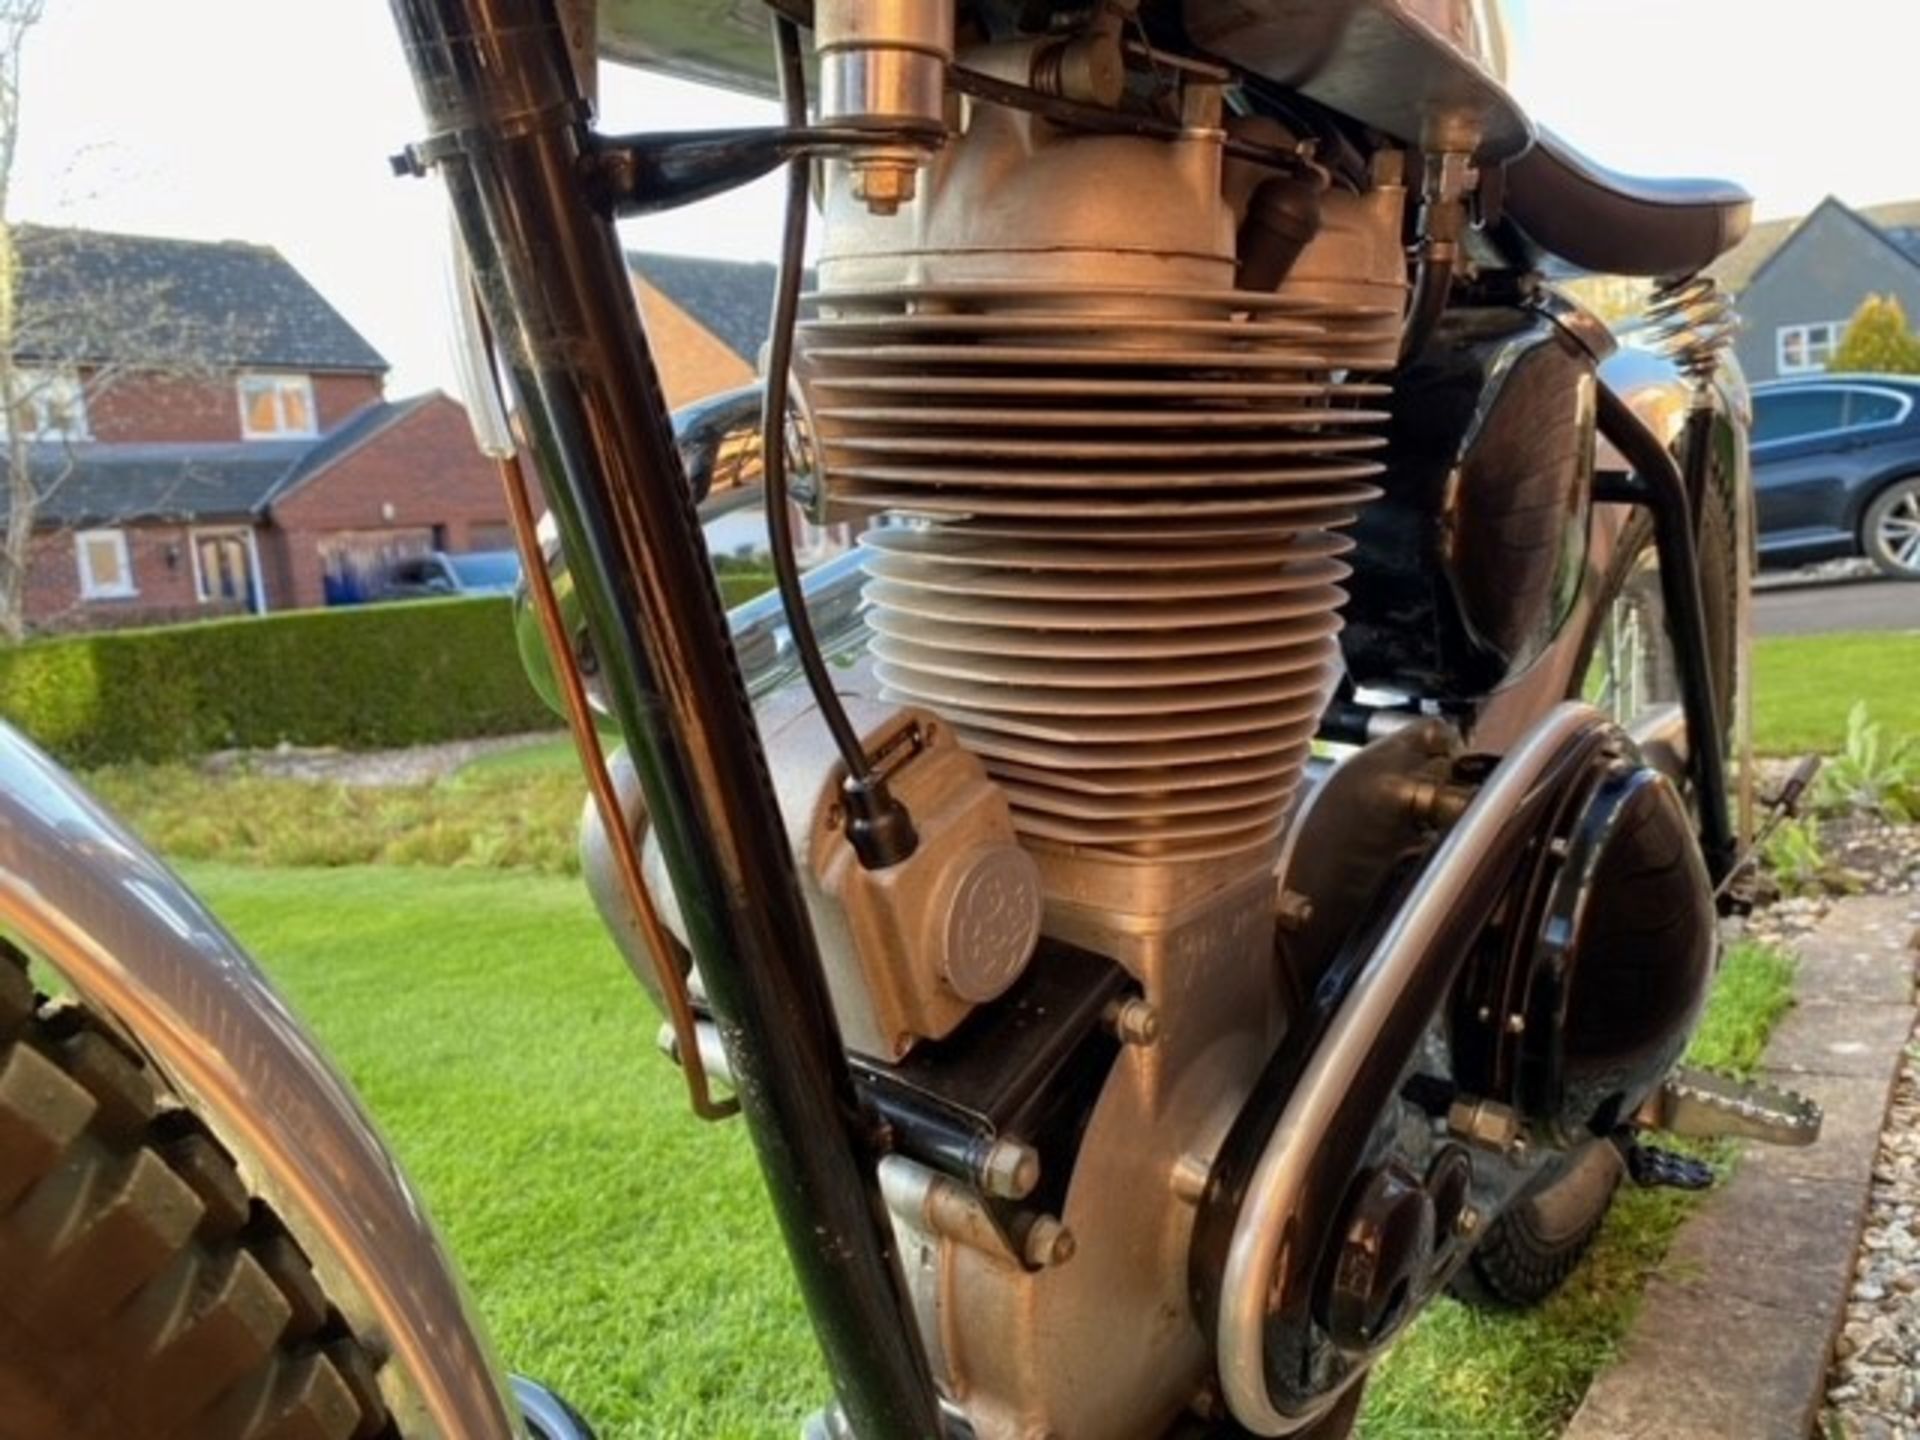 AJS Tele Rigid trials bike, 1952, 500cc. Runs and rides. This is an AJS 500cc Model 18 built into - Image 4 of 15